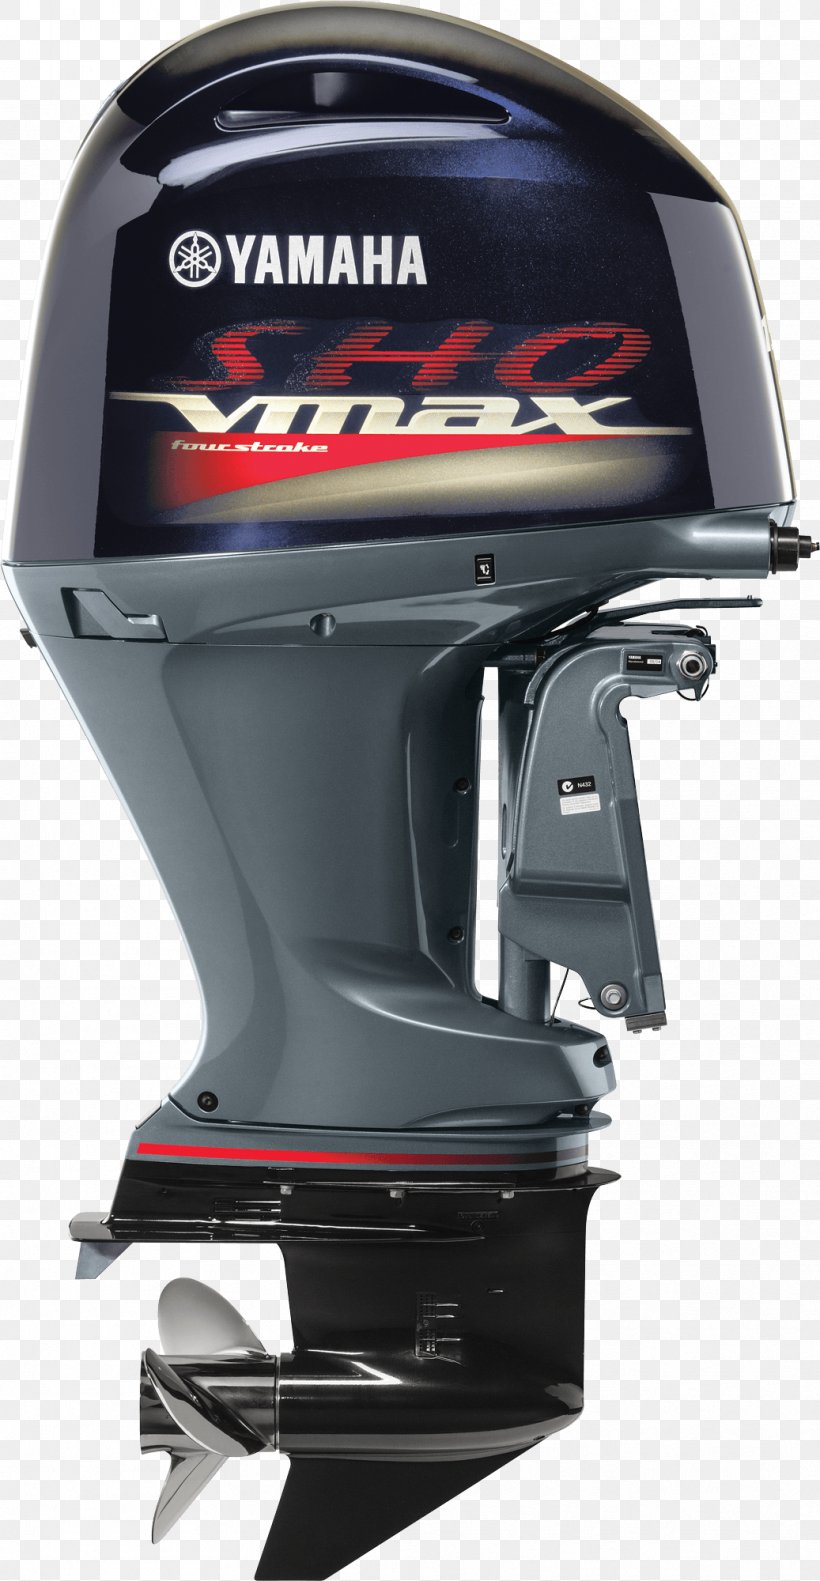 Yamaha Motor Company Ford Taurus SHO Outboard Motor Yamaha VMAX Four-stroke Engine, PNG, 1037x2000px, Yamaha Motor Company, Bicycle Helmet, Boat, Car, Engine Download Free